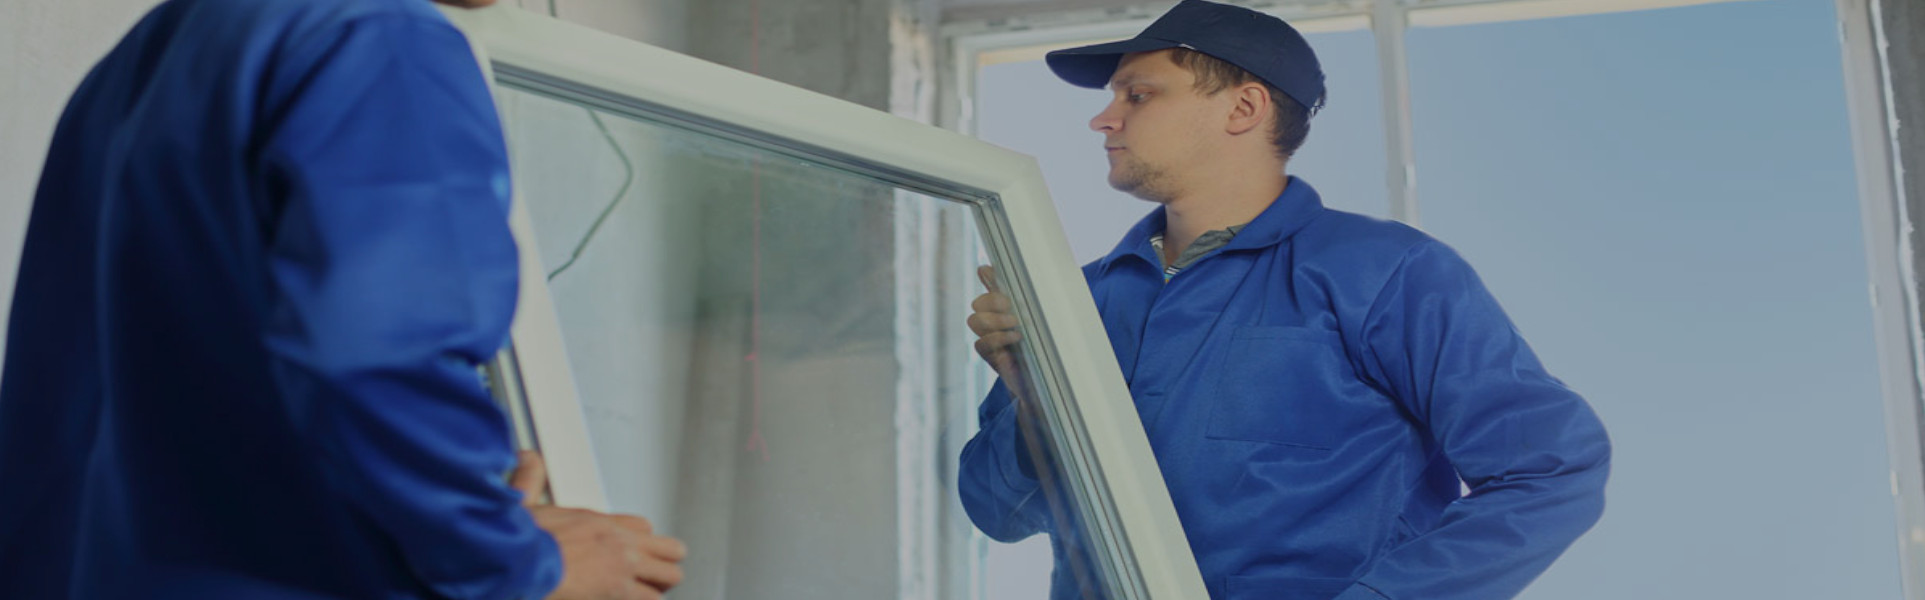 Slider, Double Glazing Installers in South Ockendon, RM15